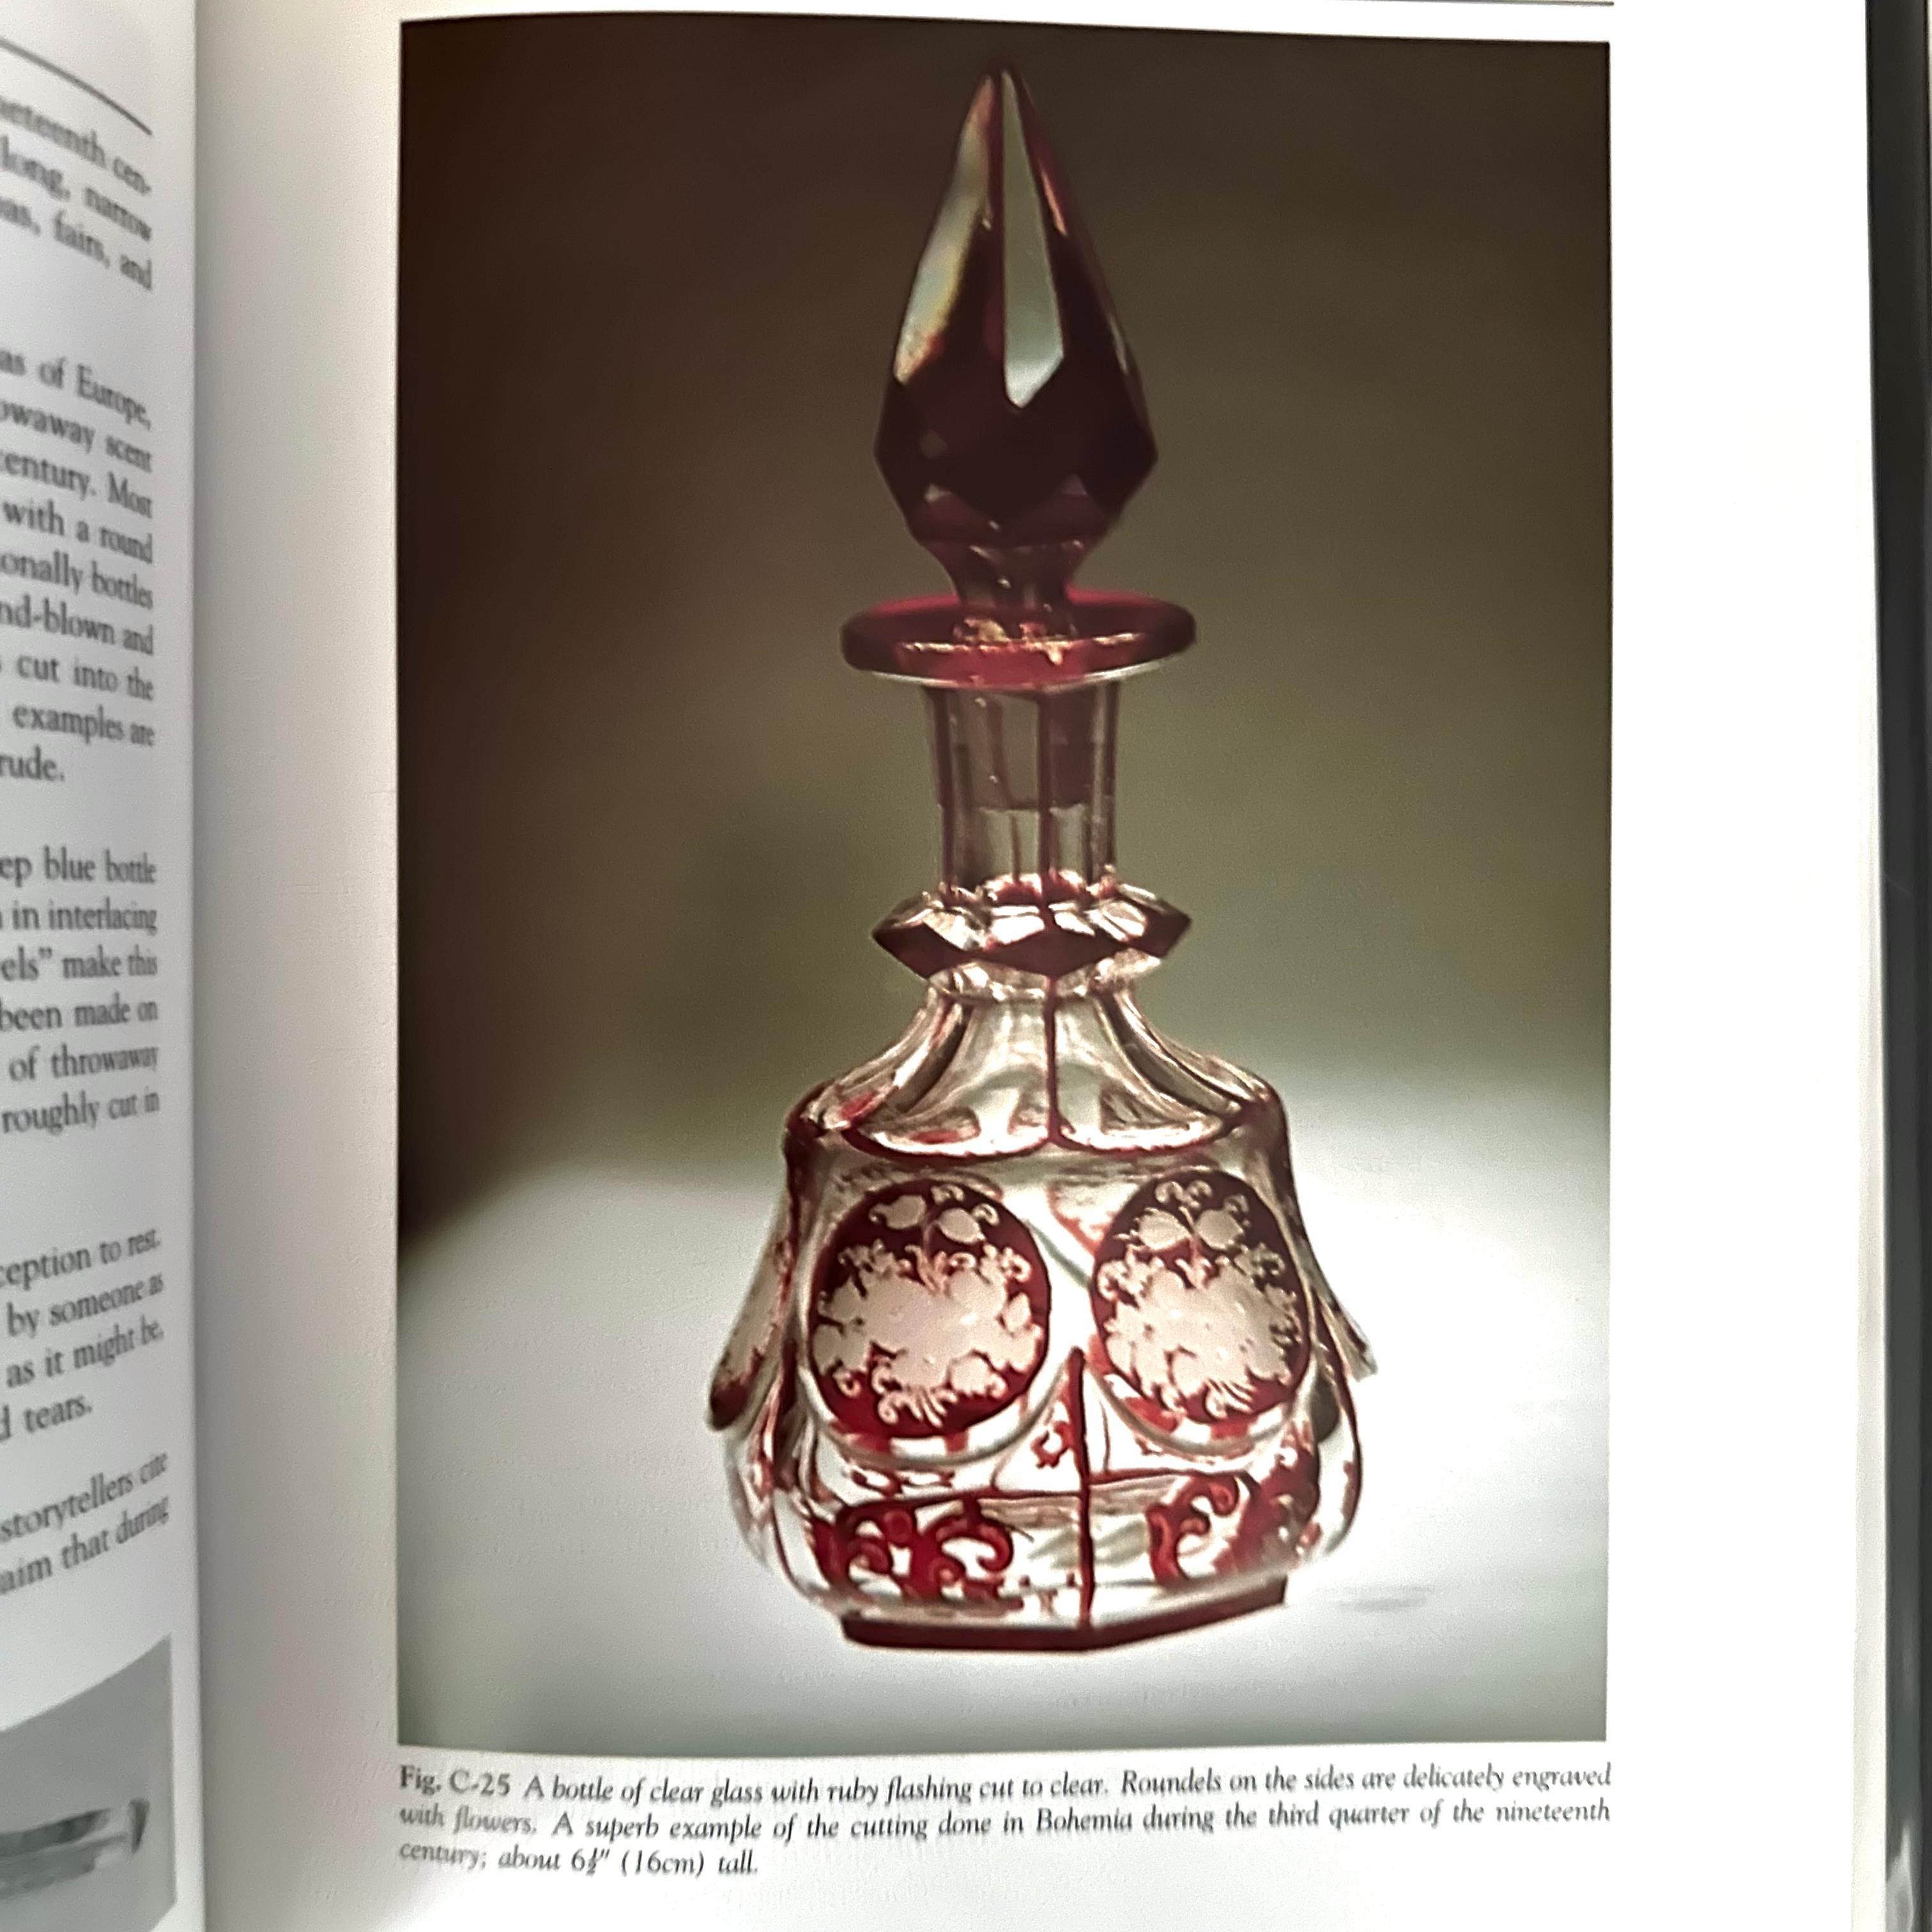 Published by Wallace-Homestead Company, updated and revised edition, 1989. Hardback with English text.

This comprehensive volume, complemented by a handy price guide, is the ultimate reference book for perfume bottle aficionados. These beautiful